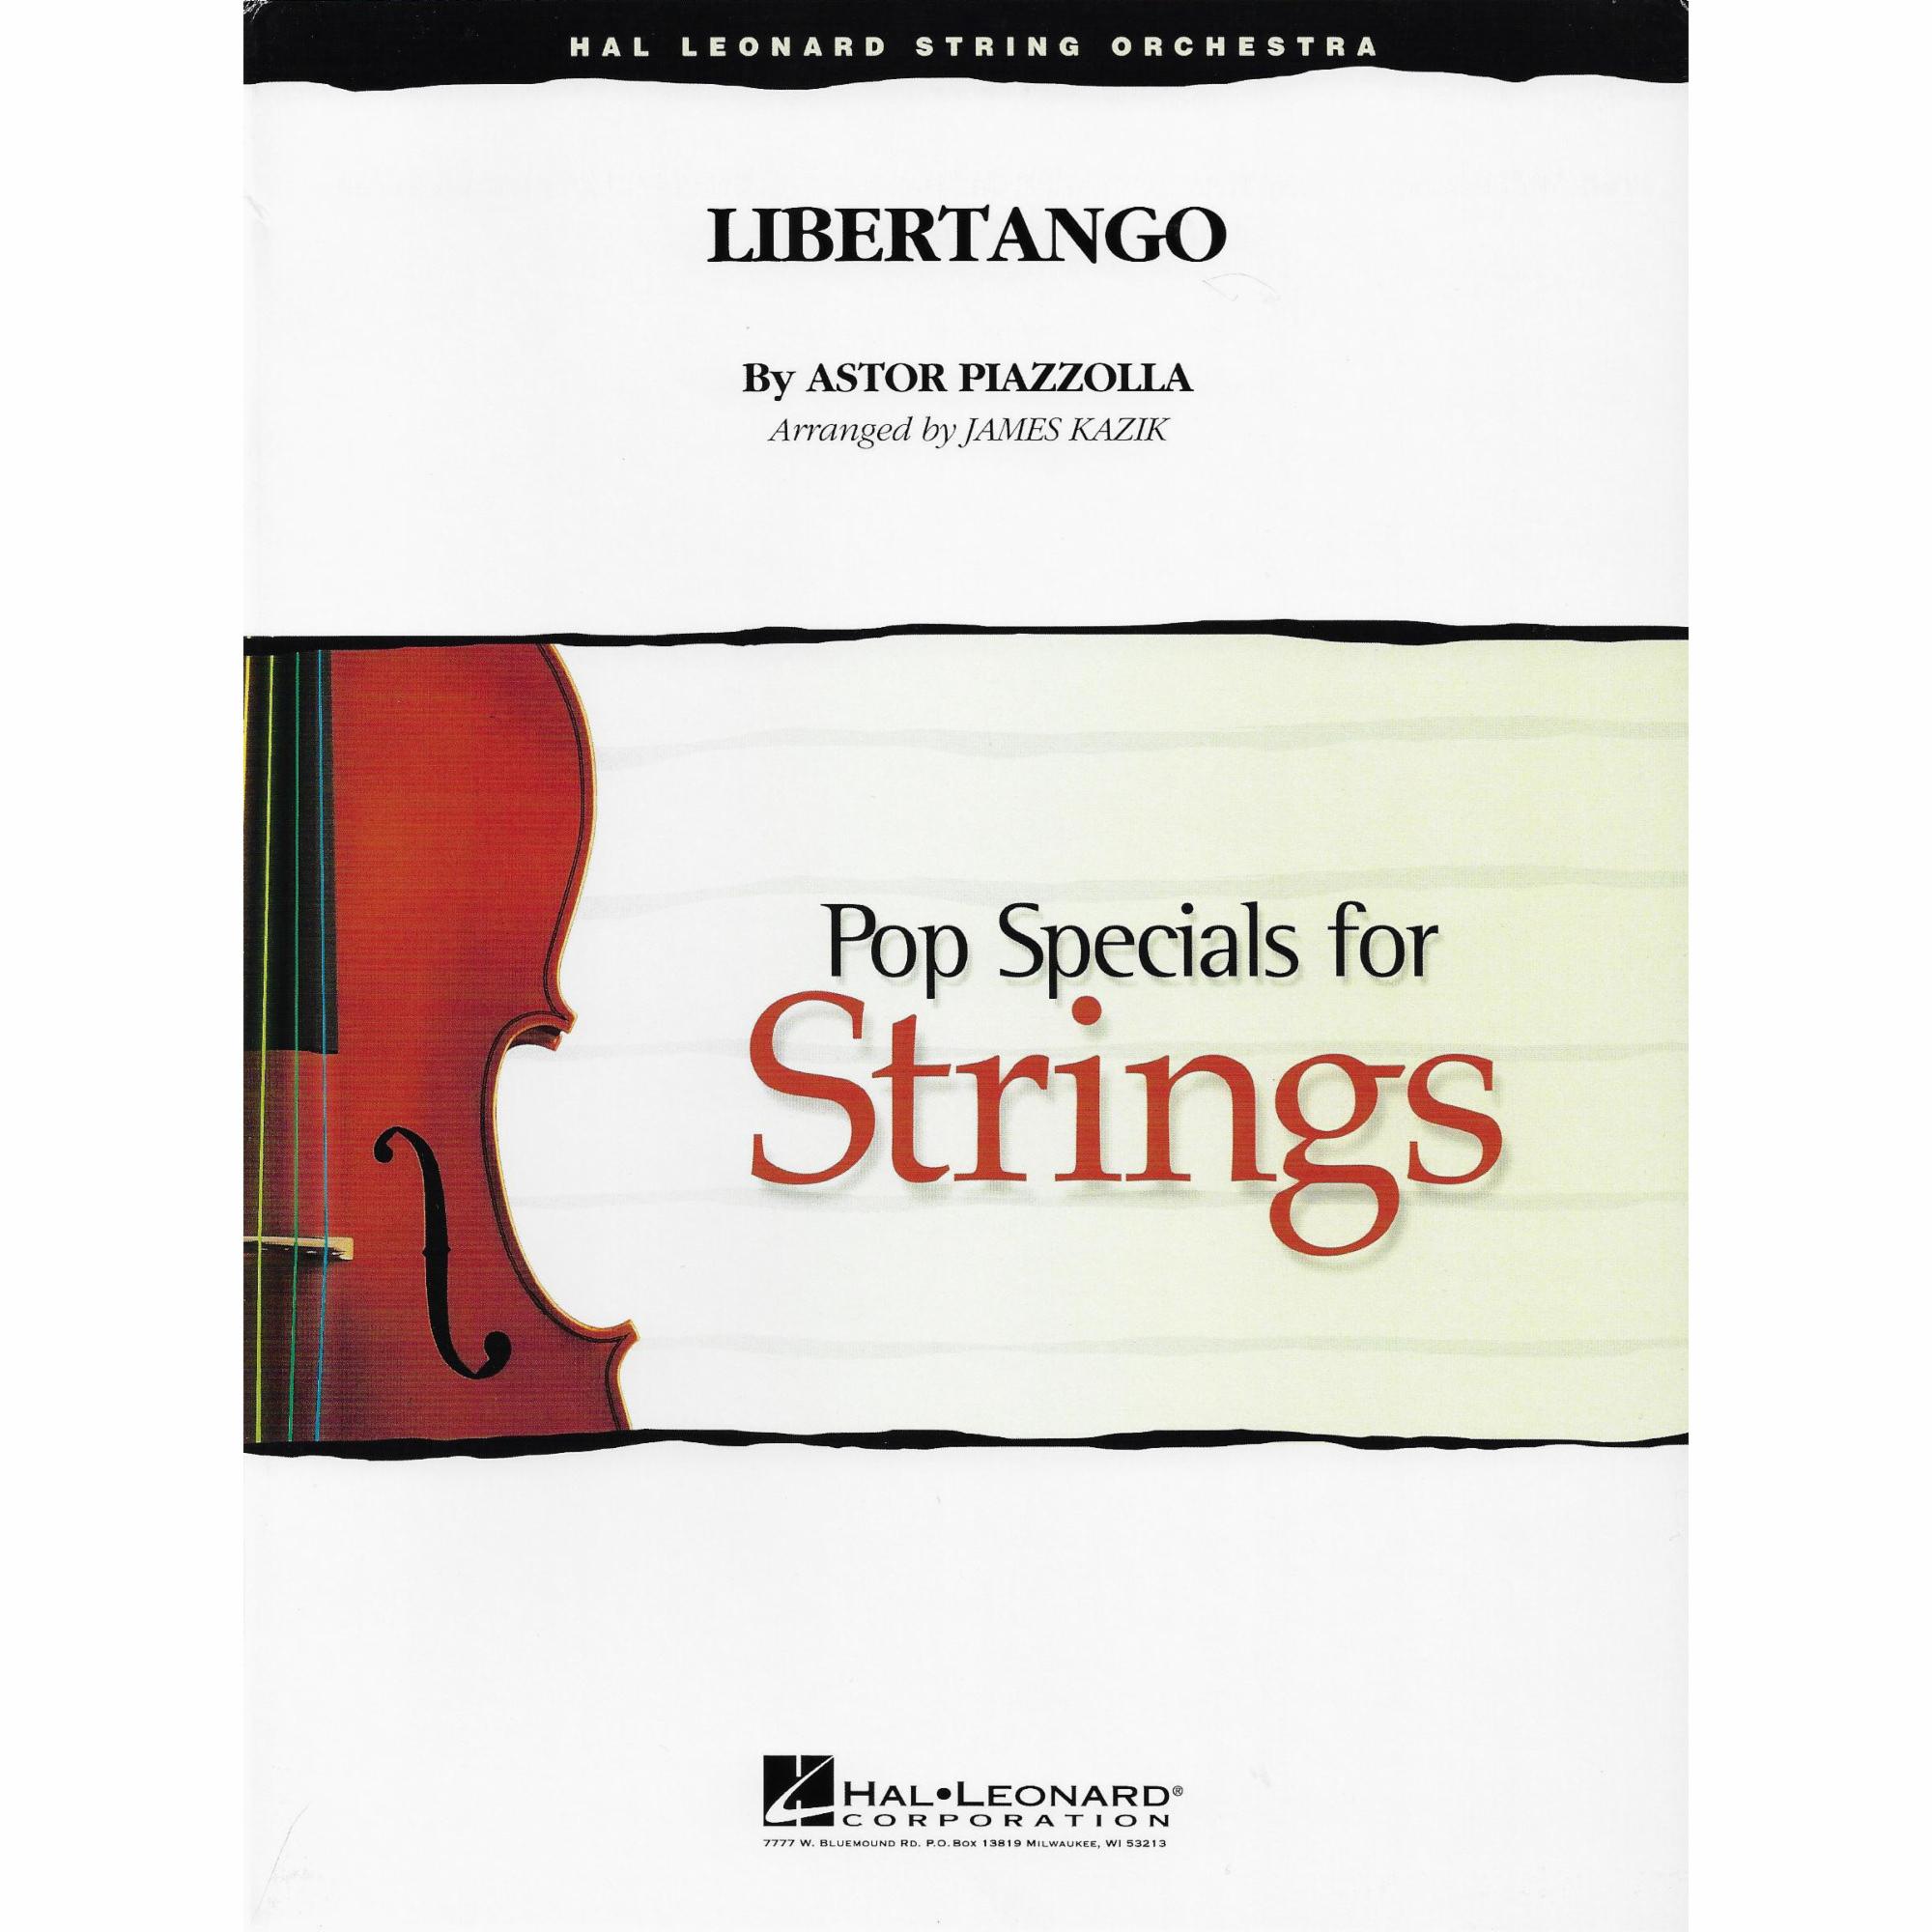 Libertango for String Orchestra